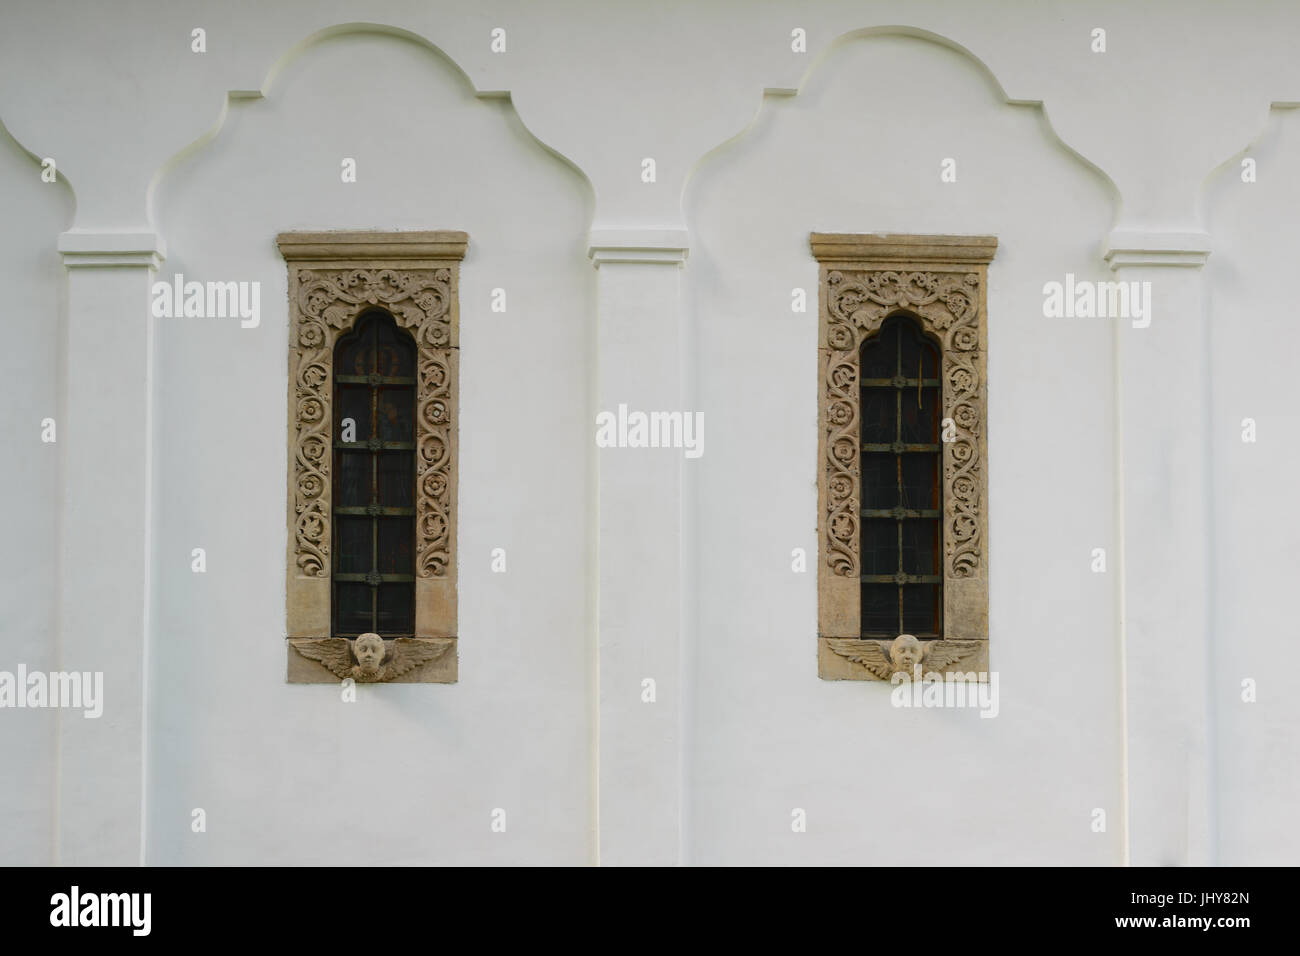 18th century style windows frame and decoration sculptured in stone on white walls background - exterior Stock Photo